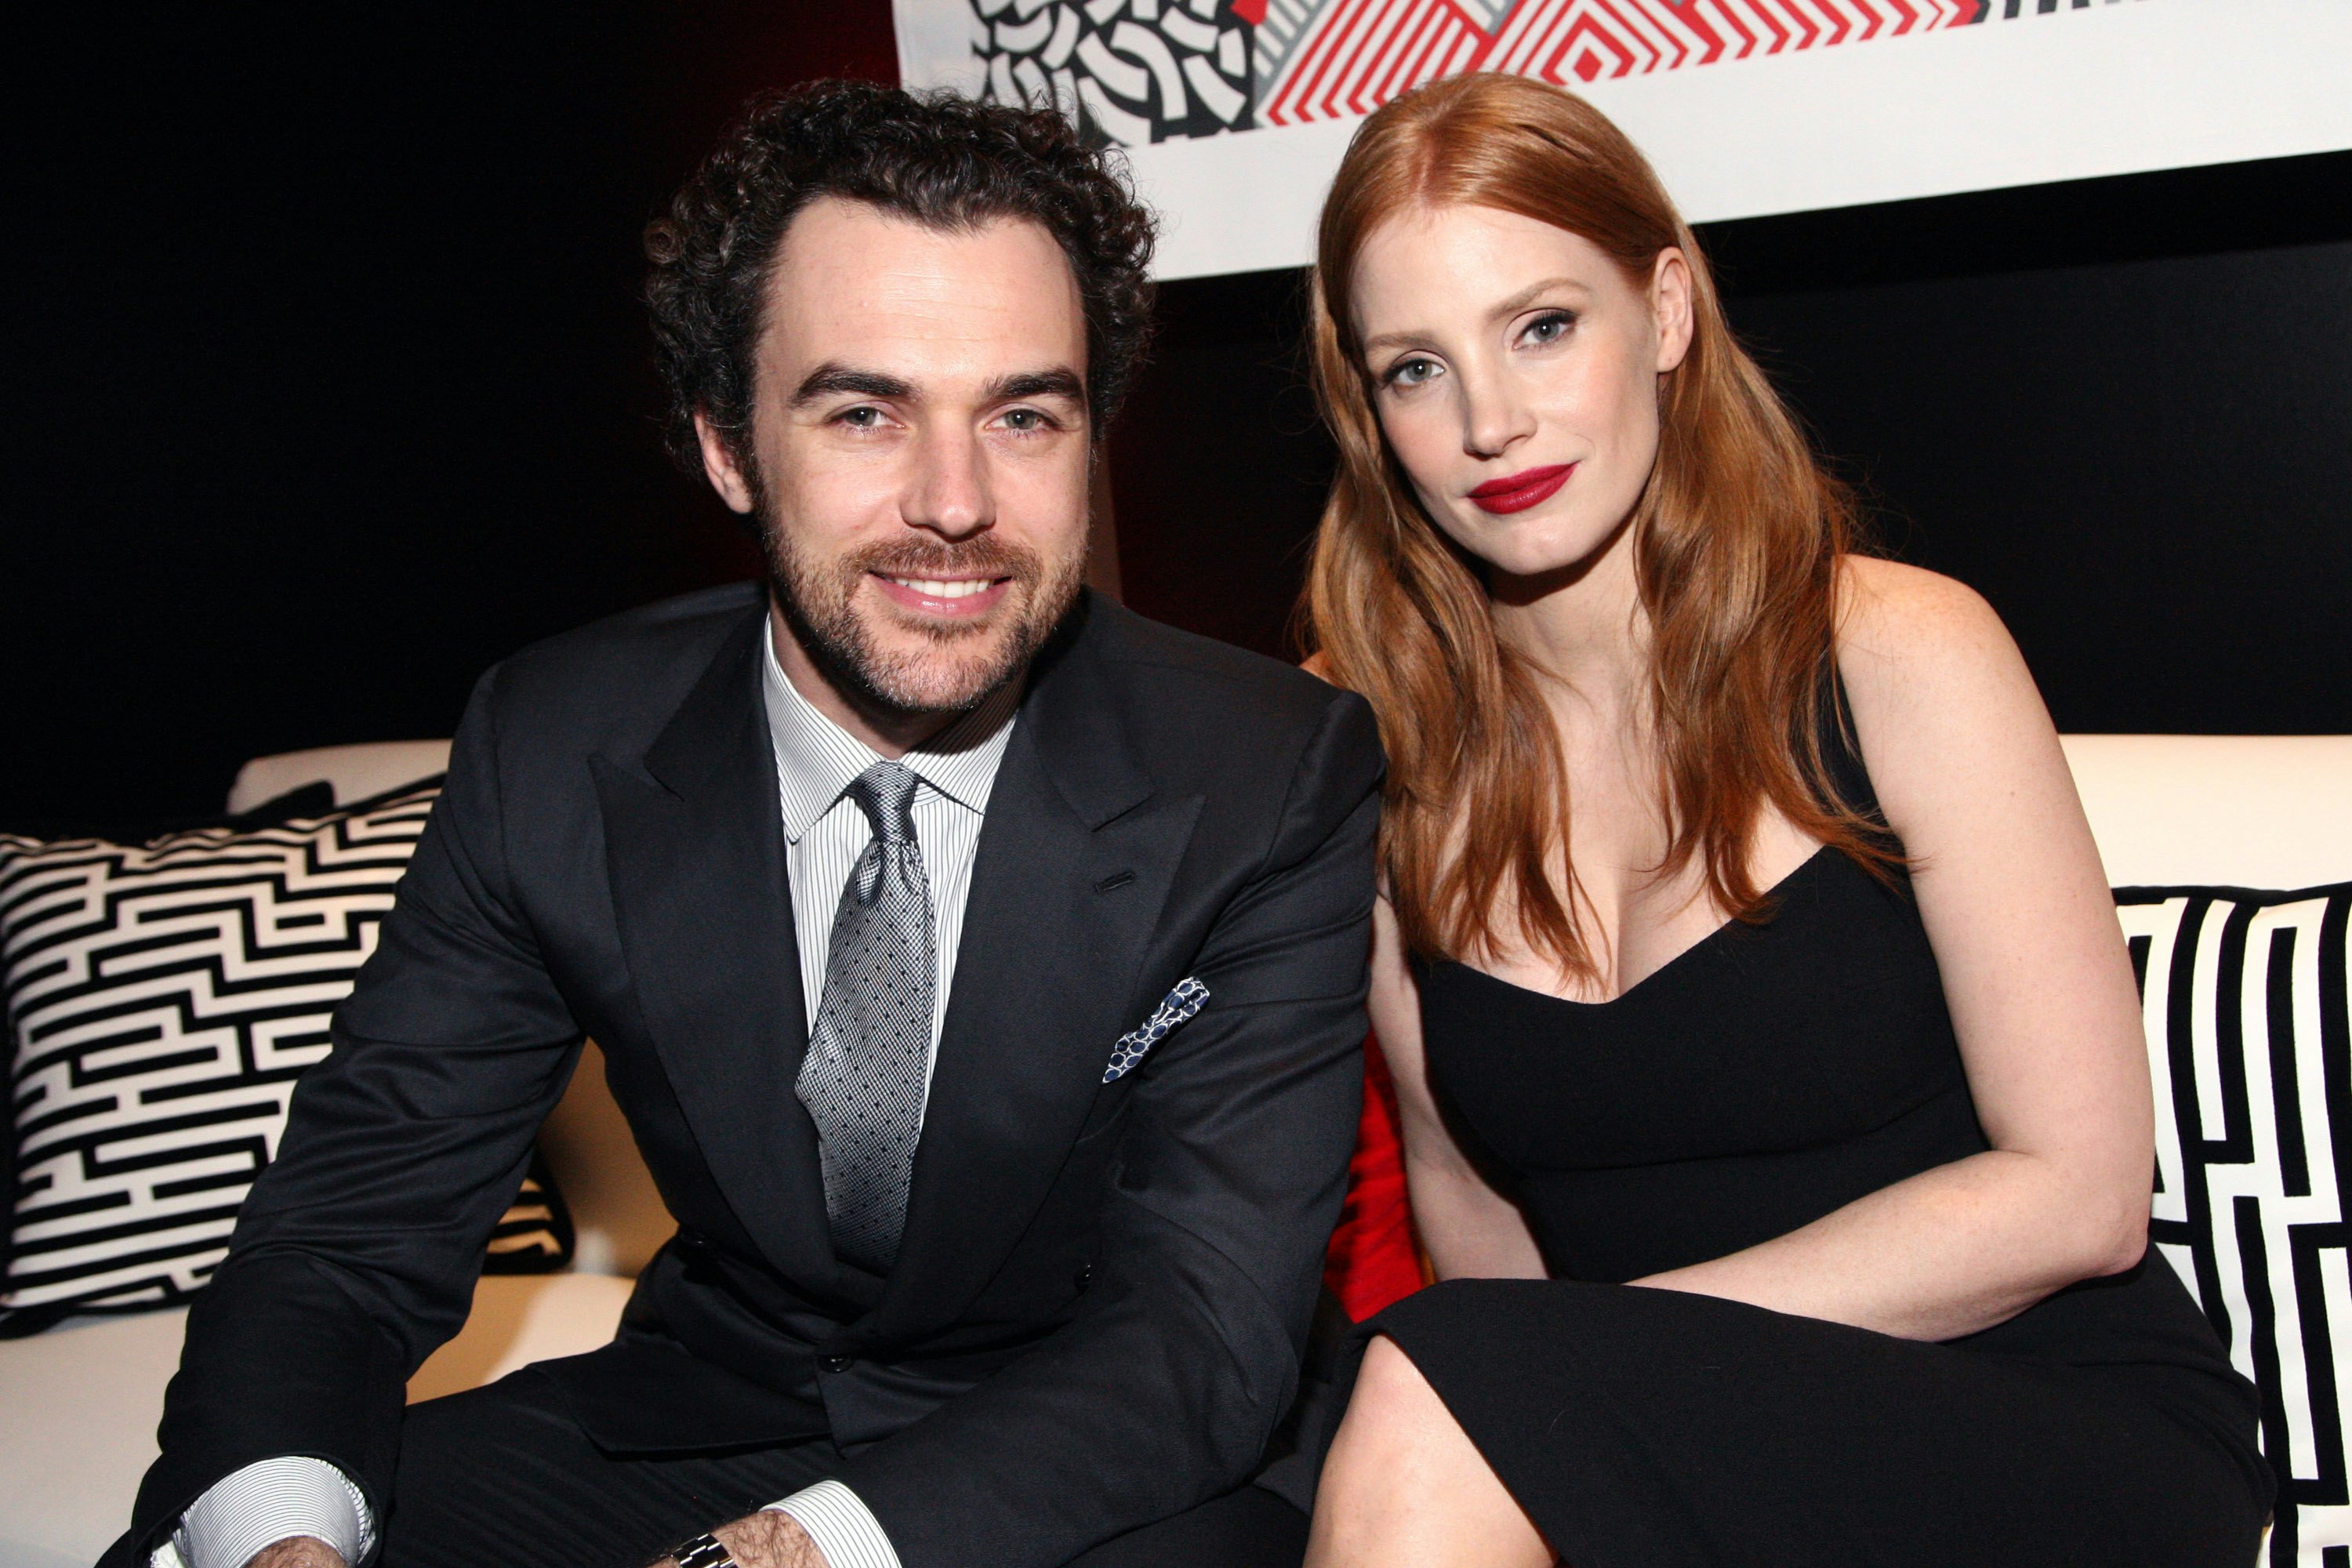 Who Is Jessica Chastain's Husband? Gian Luca Passi de Preposulo Has An  Italian Family With Rich History